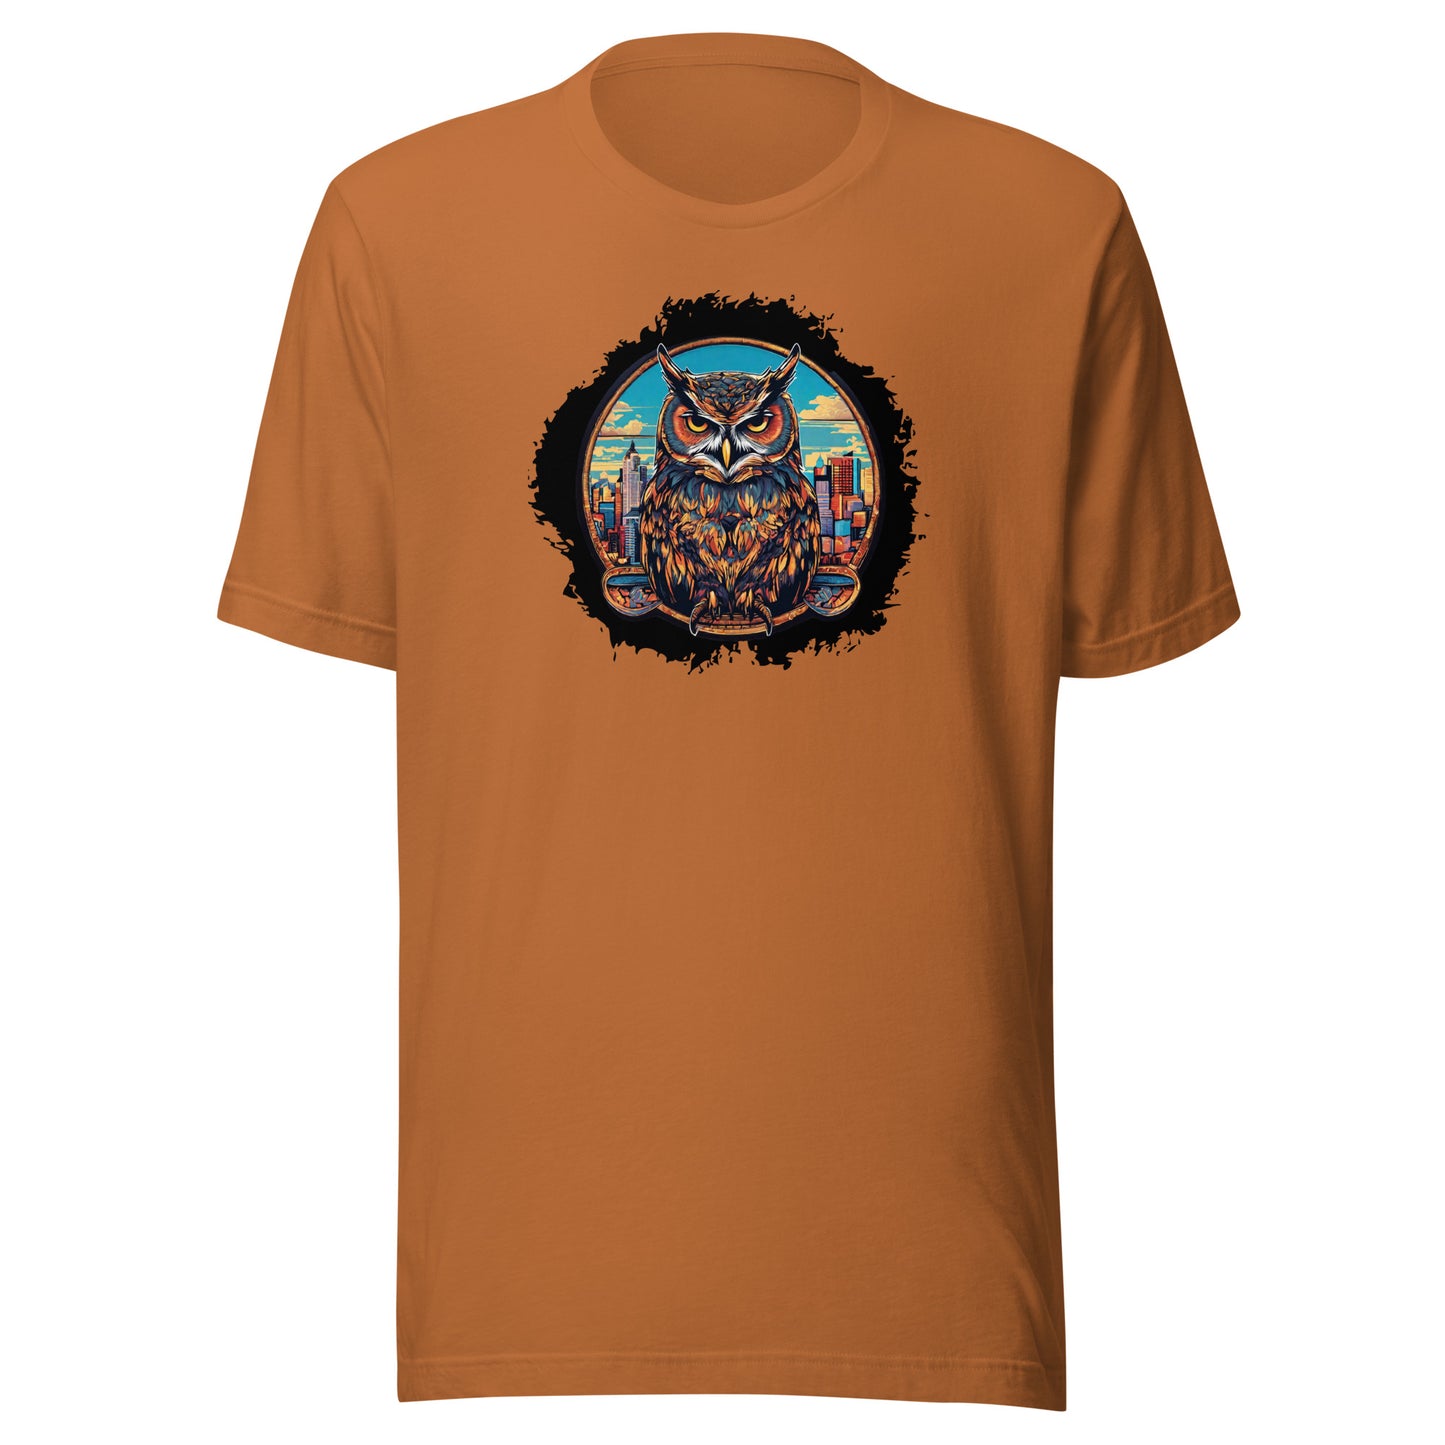 Owl in the City Emblem T-Shirt Toast